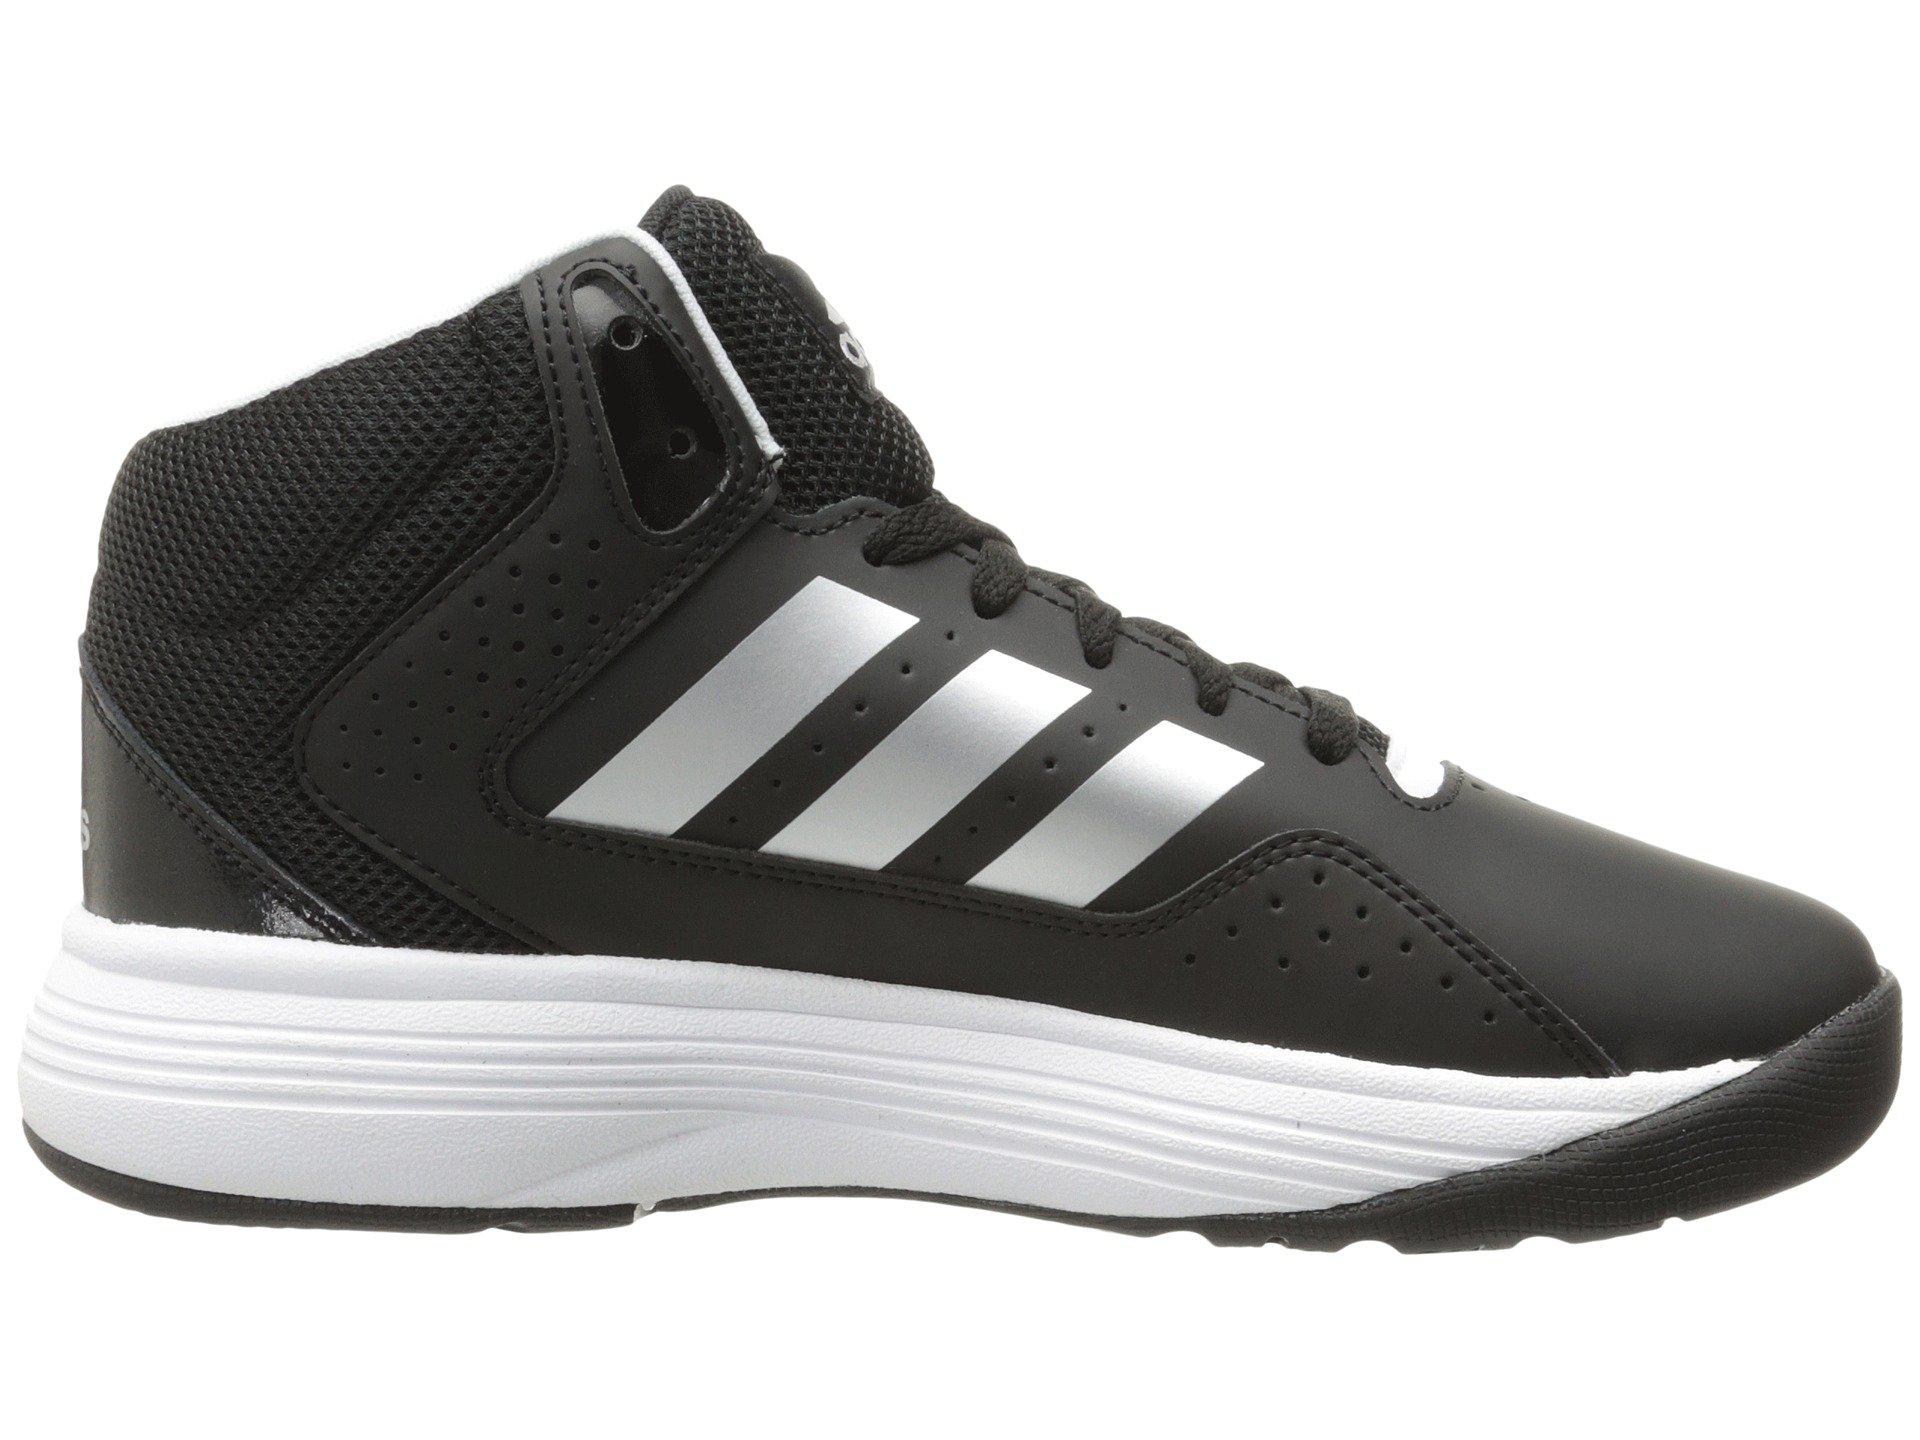 adidas Cloudfoam Ilation Mid (core Black/matte Silver/white) Men's Basketball Shoes in Black for 